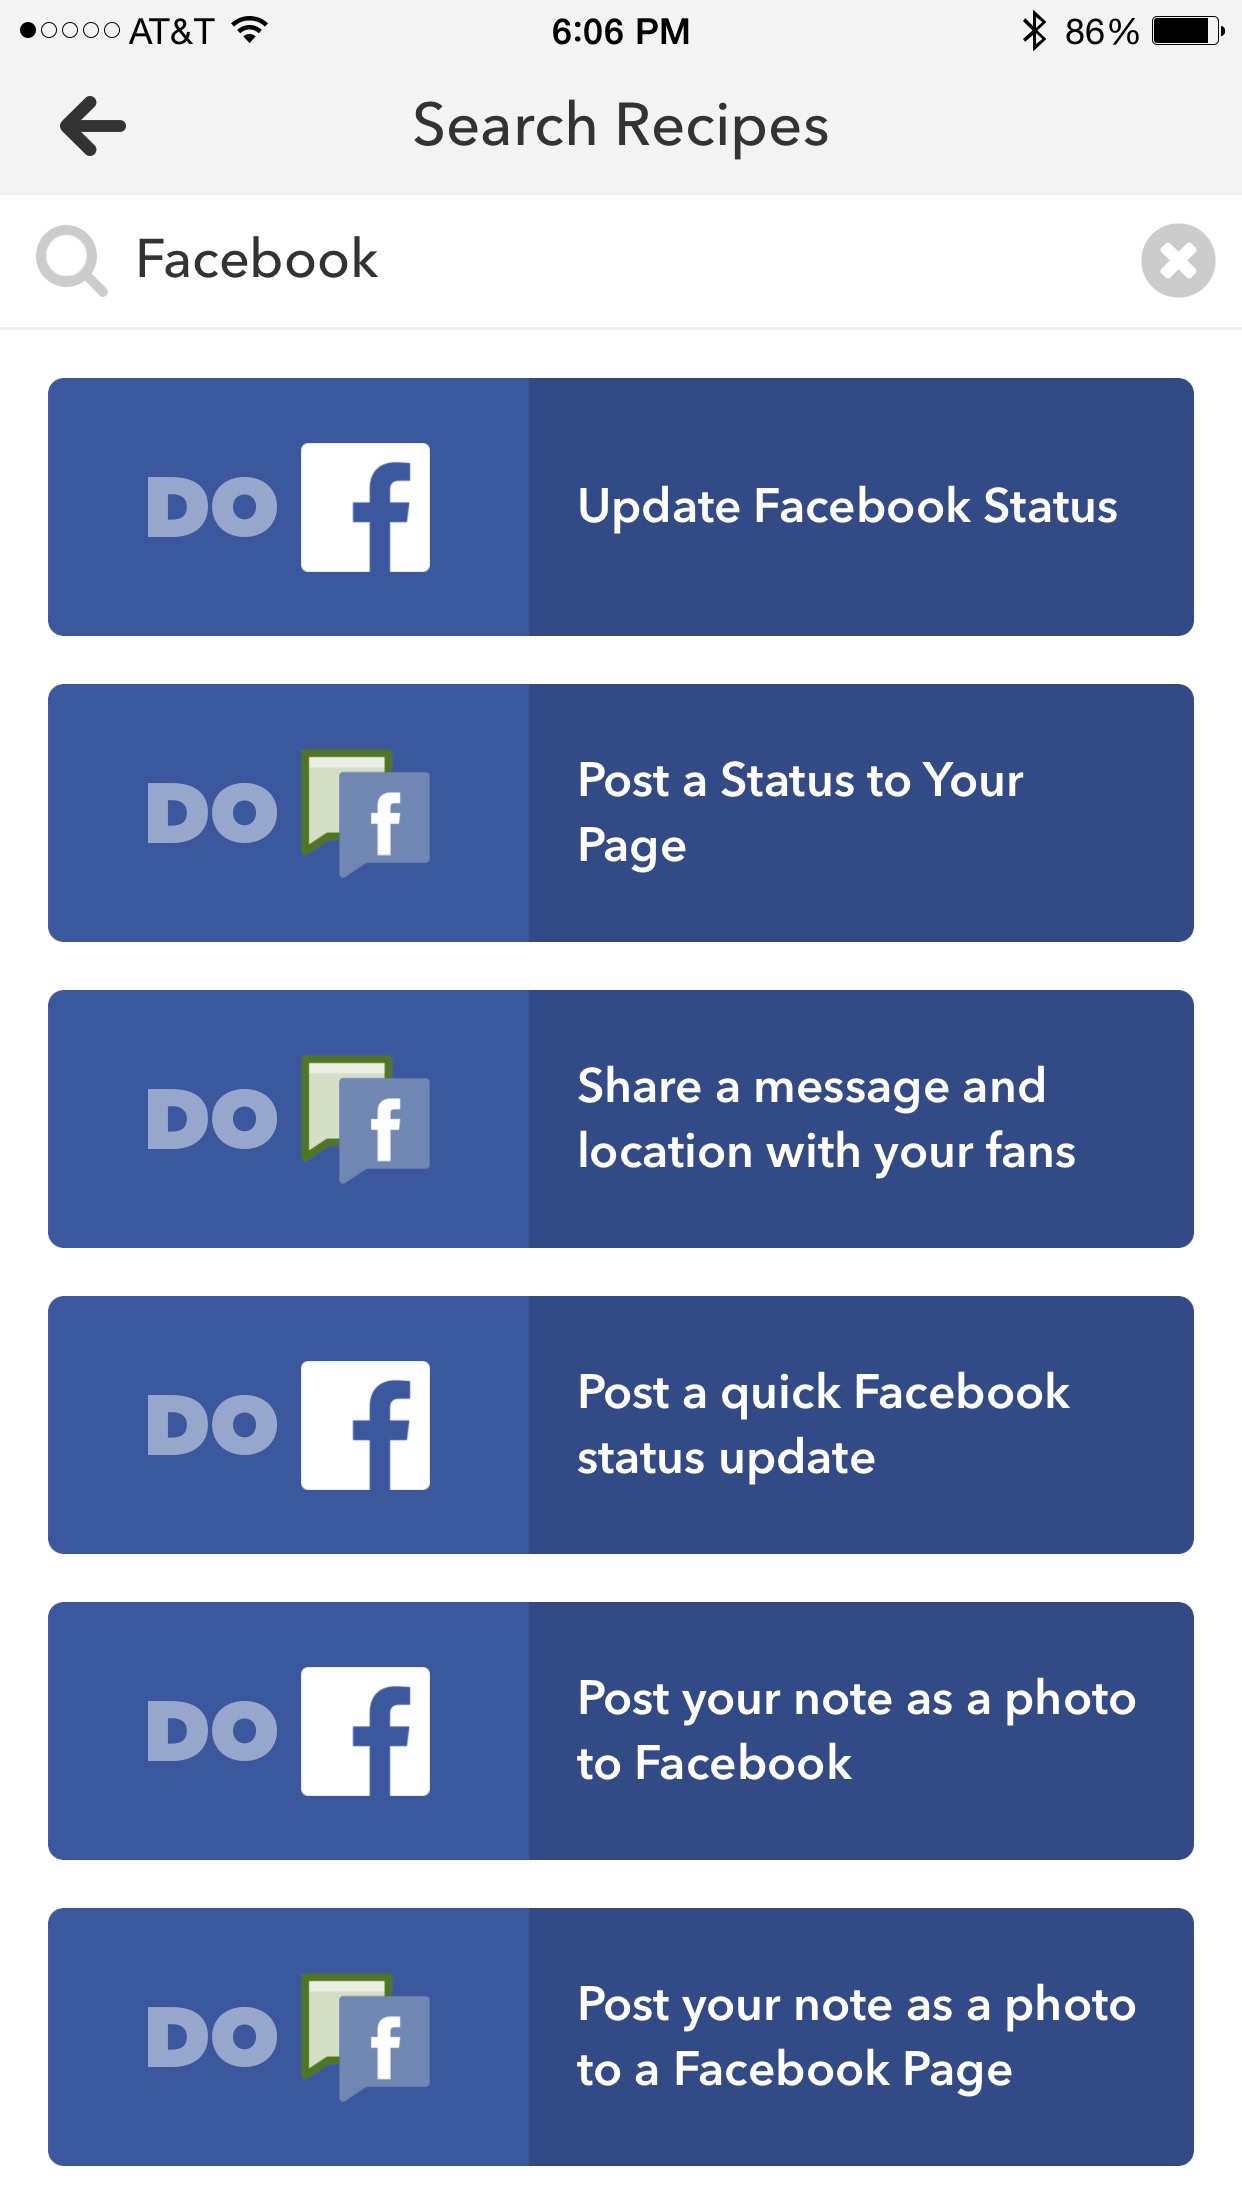 Facebook and Do Note by IFTTT